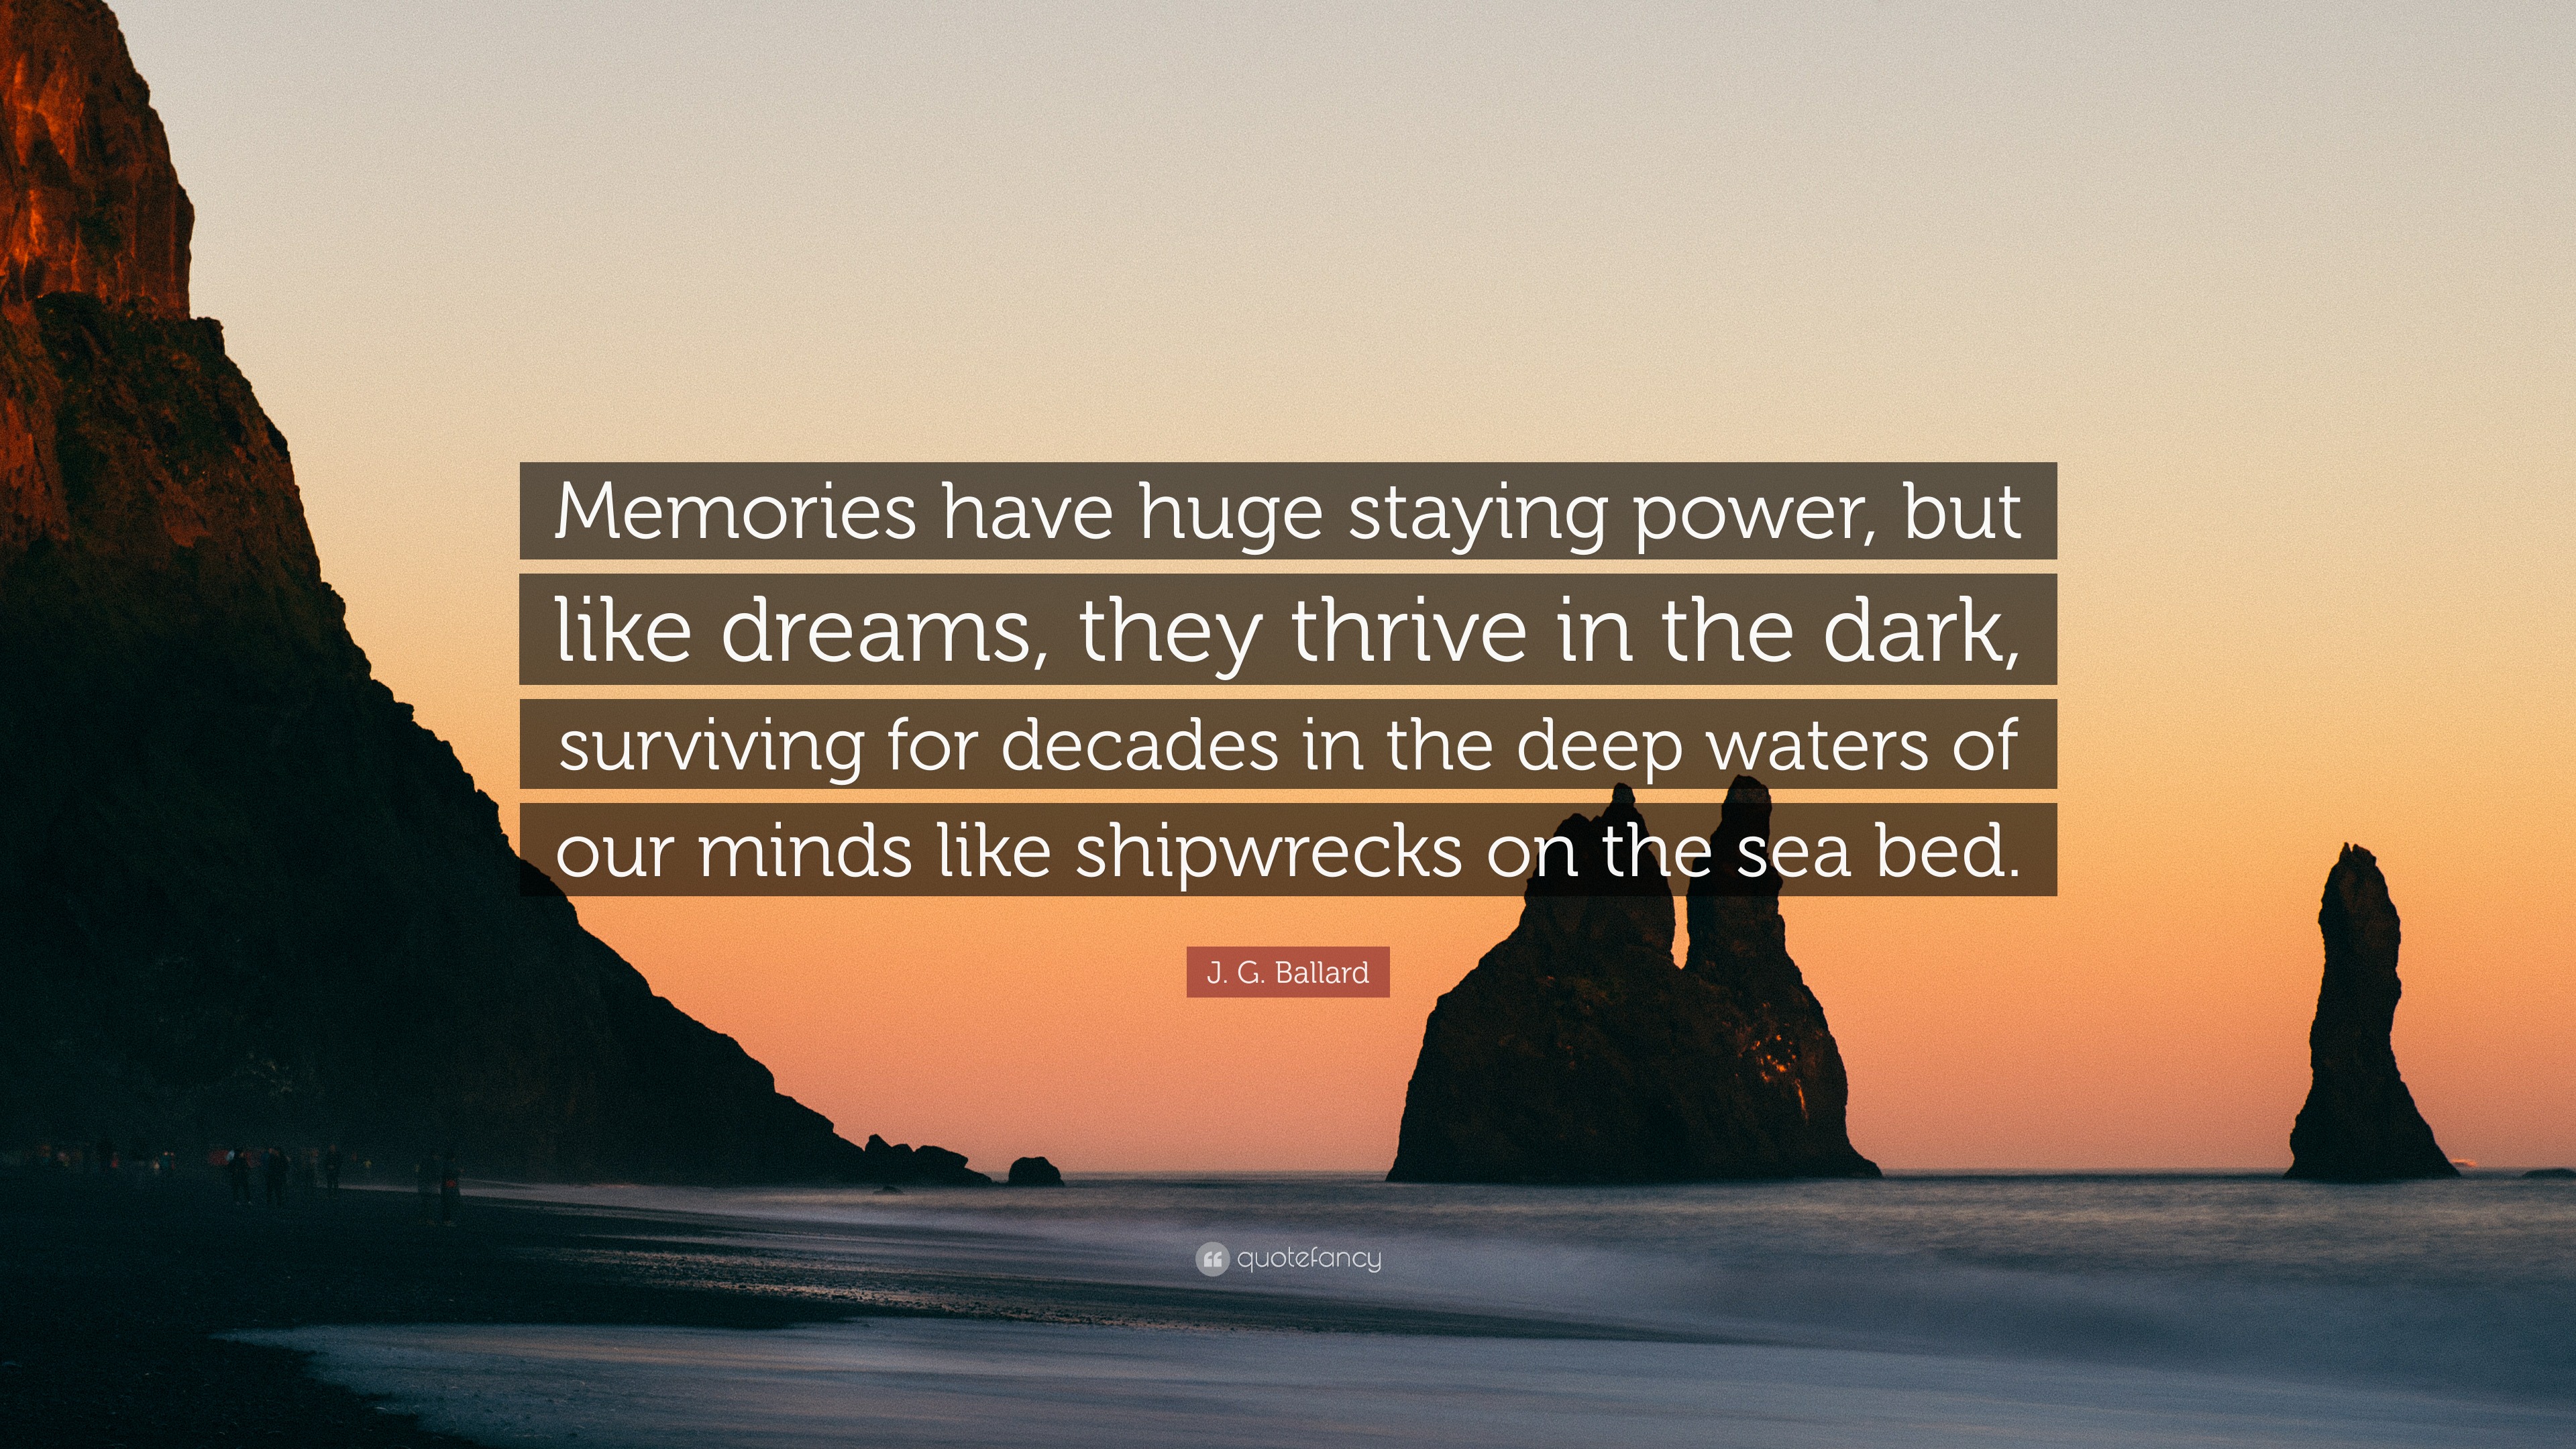 J. G. Ballard Quote: “Memories have huge staying power, but like